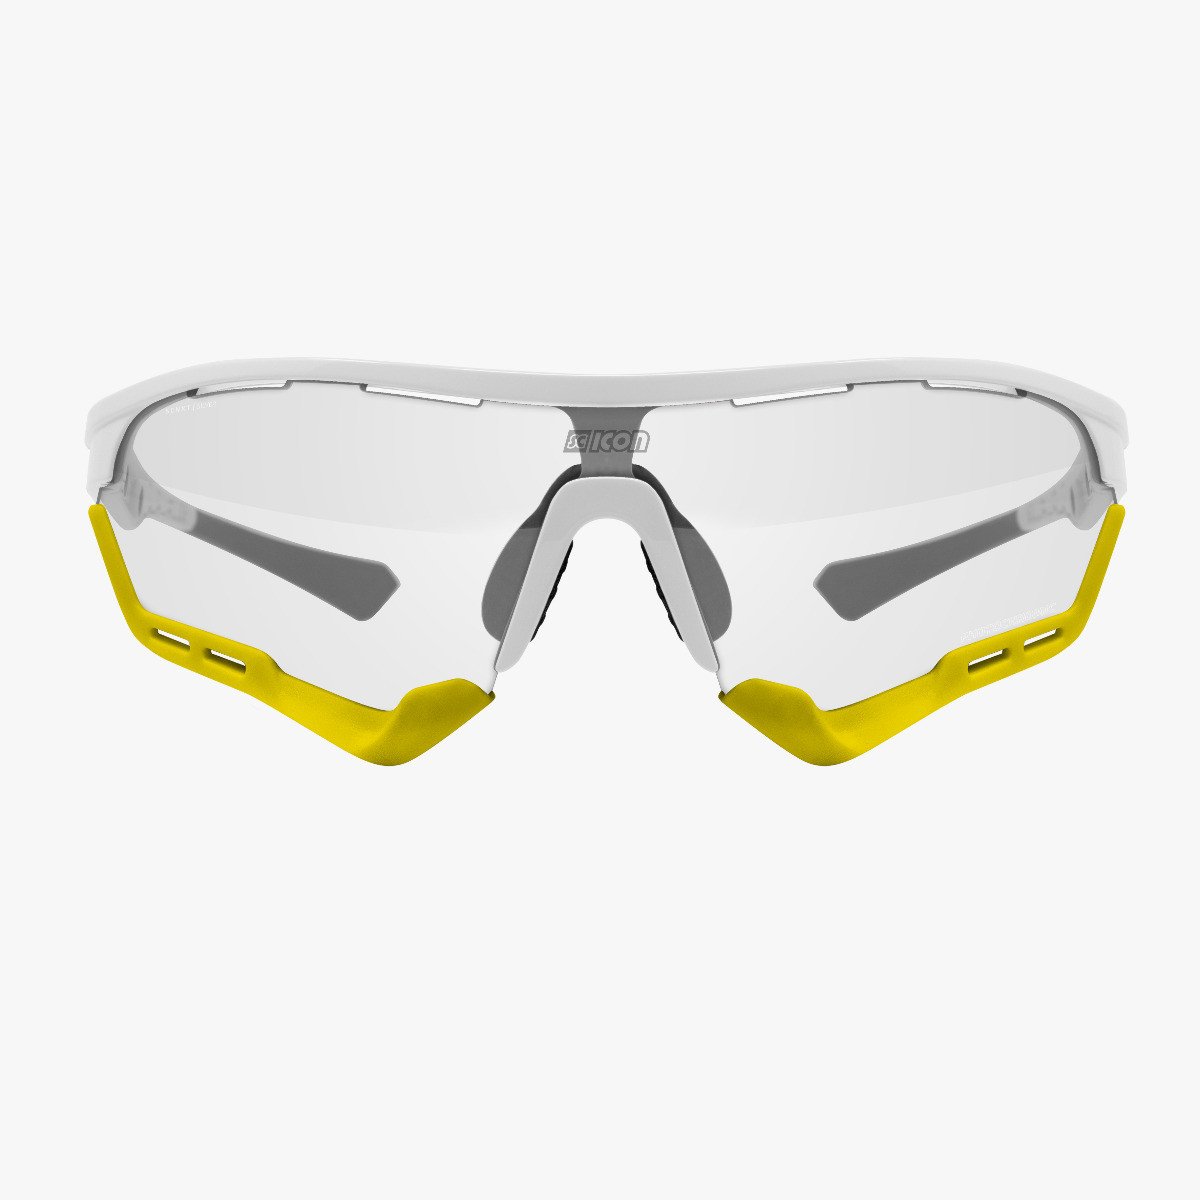 Scicon Sports | Aerotech Sport Performance Sunglasses - White / Photochromic Silver - EY14180405